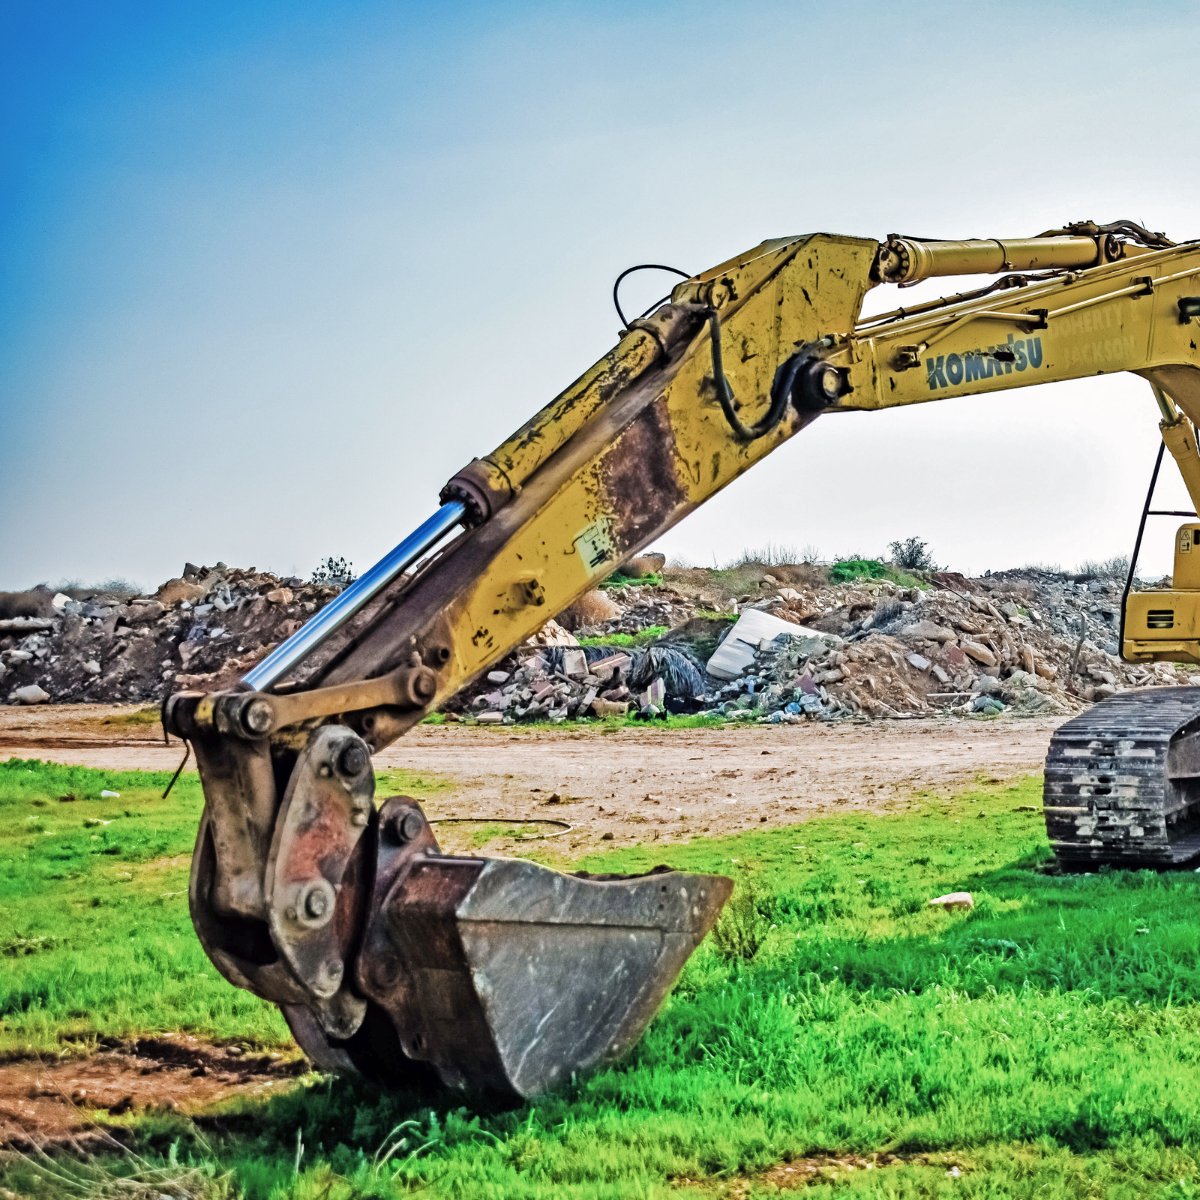 How to make your #excavatorattachments live longer?
Tips 1: verify the presence of damage due to wear and tear on the most commonly used #attachments
 
#retweet with YOUR #tips